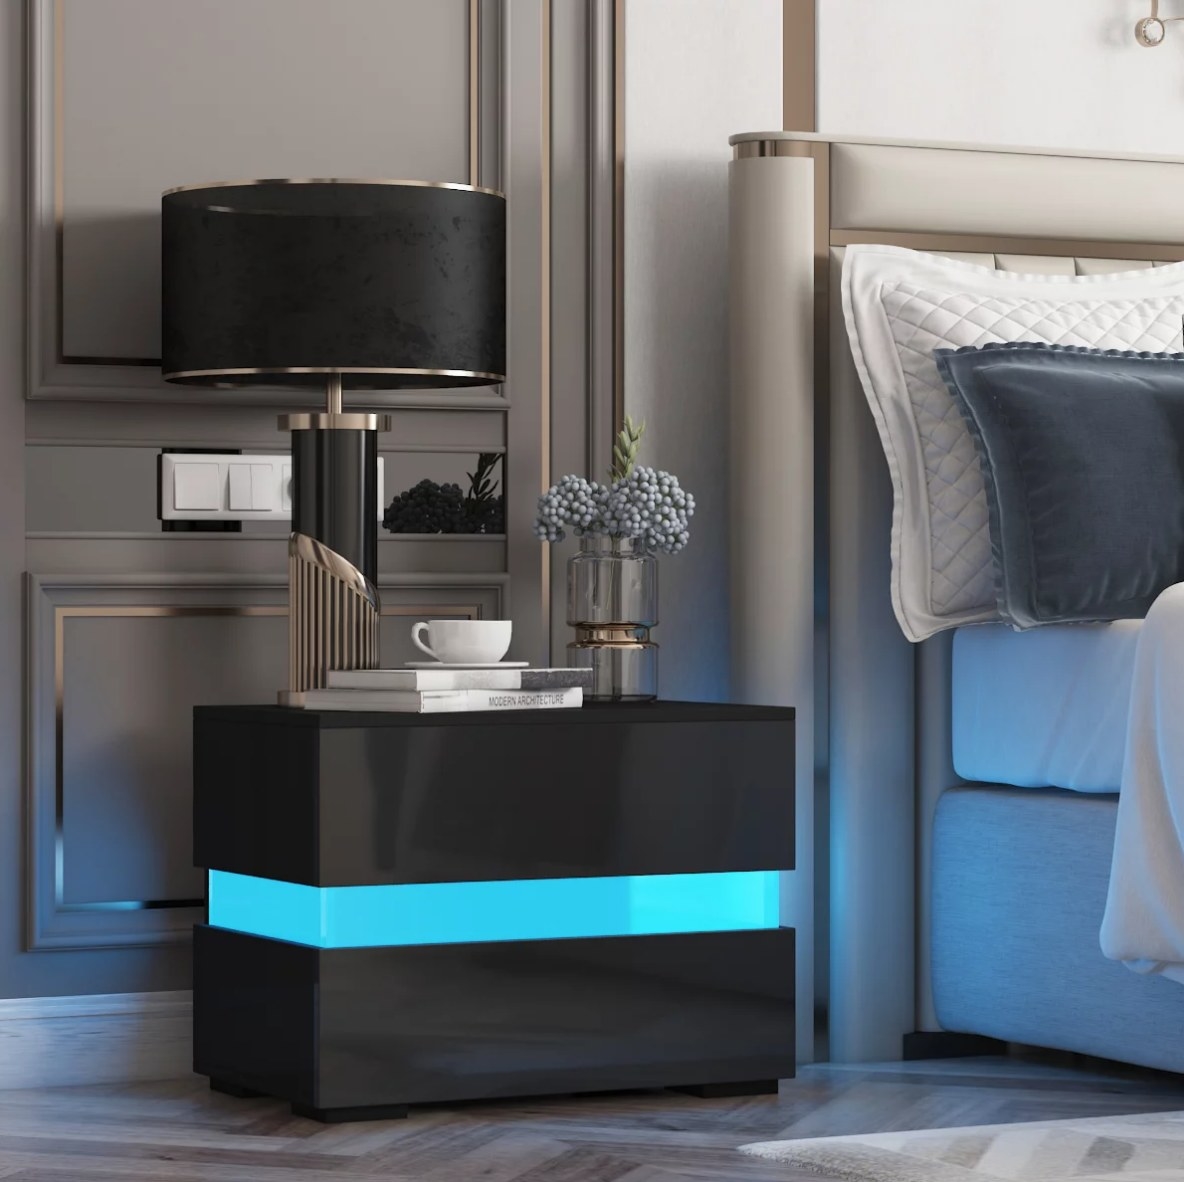 black nightstand with blue LED strip light in middle between two drawers